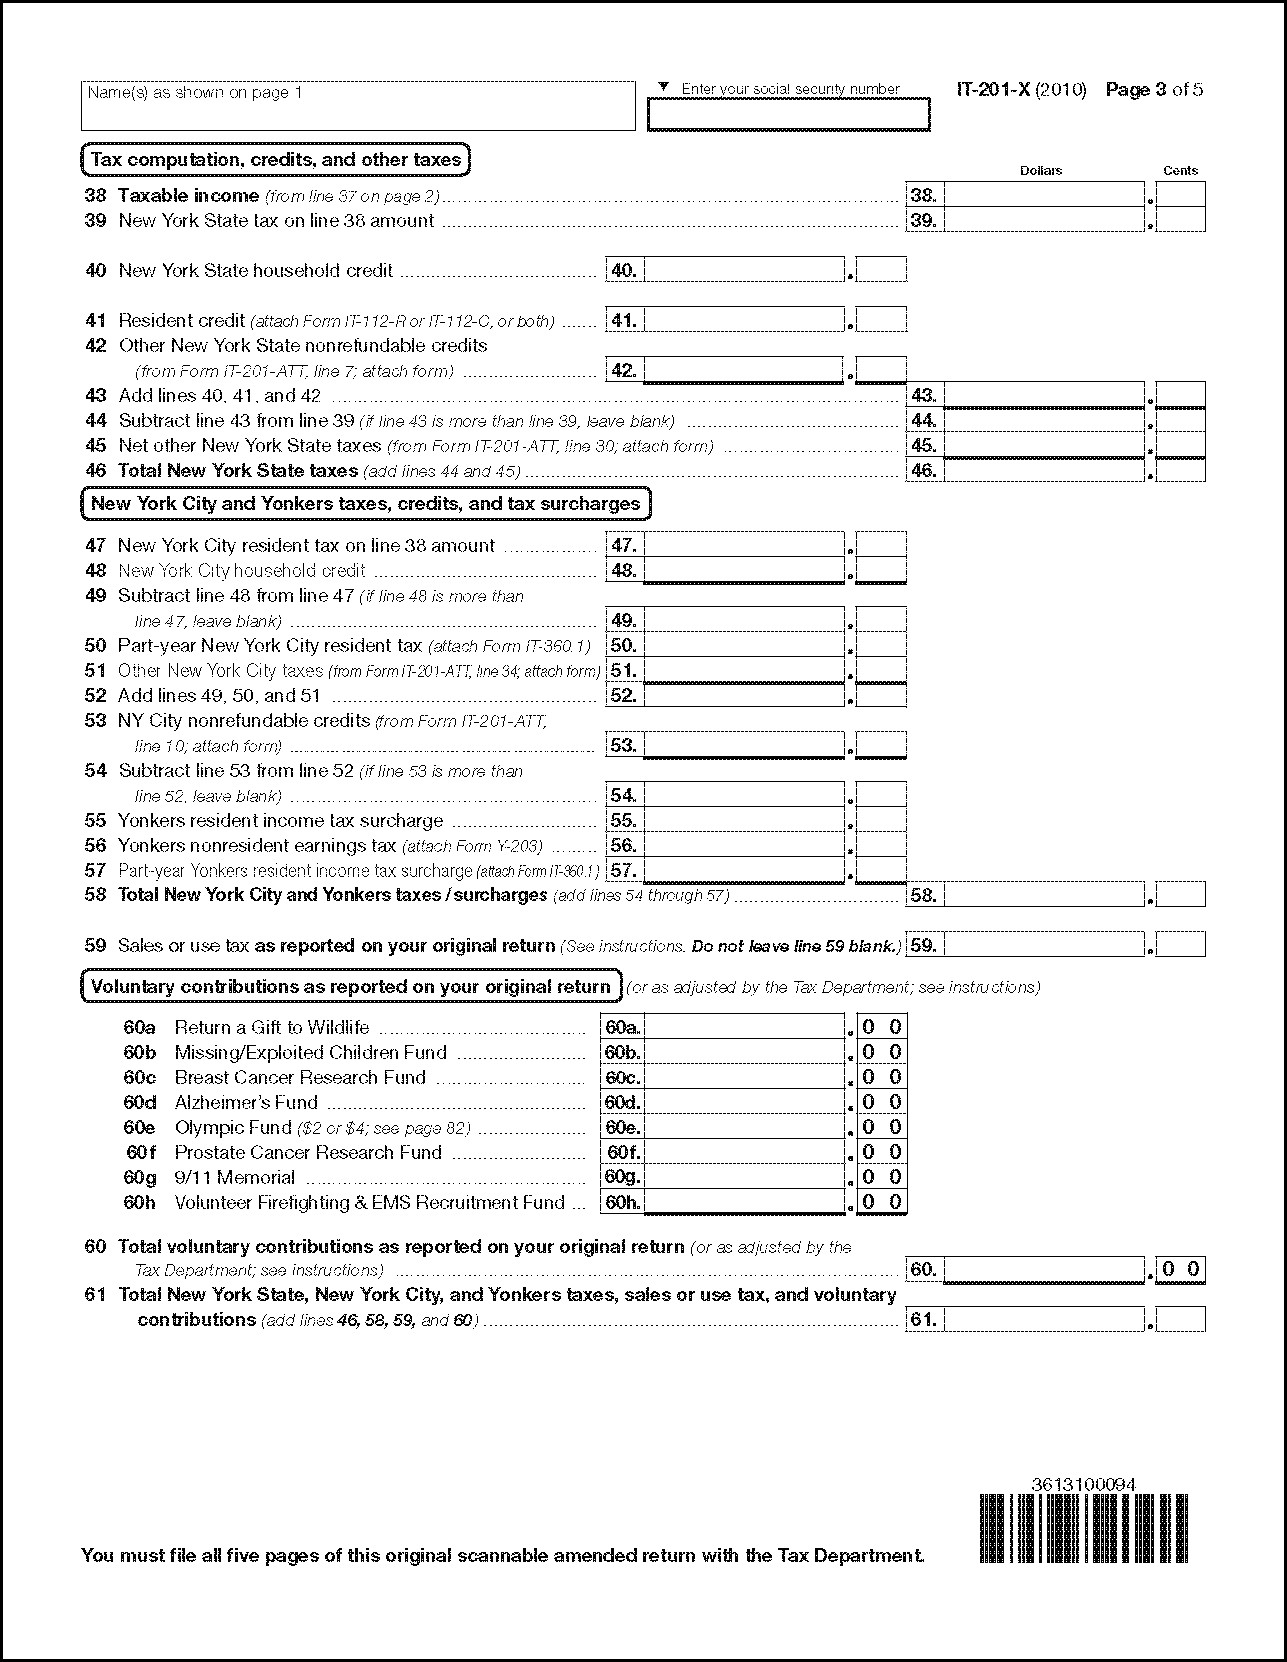 ny-state-tax-form-it-201-v-form-resume-examples-dp9lj81vrd